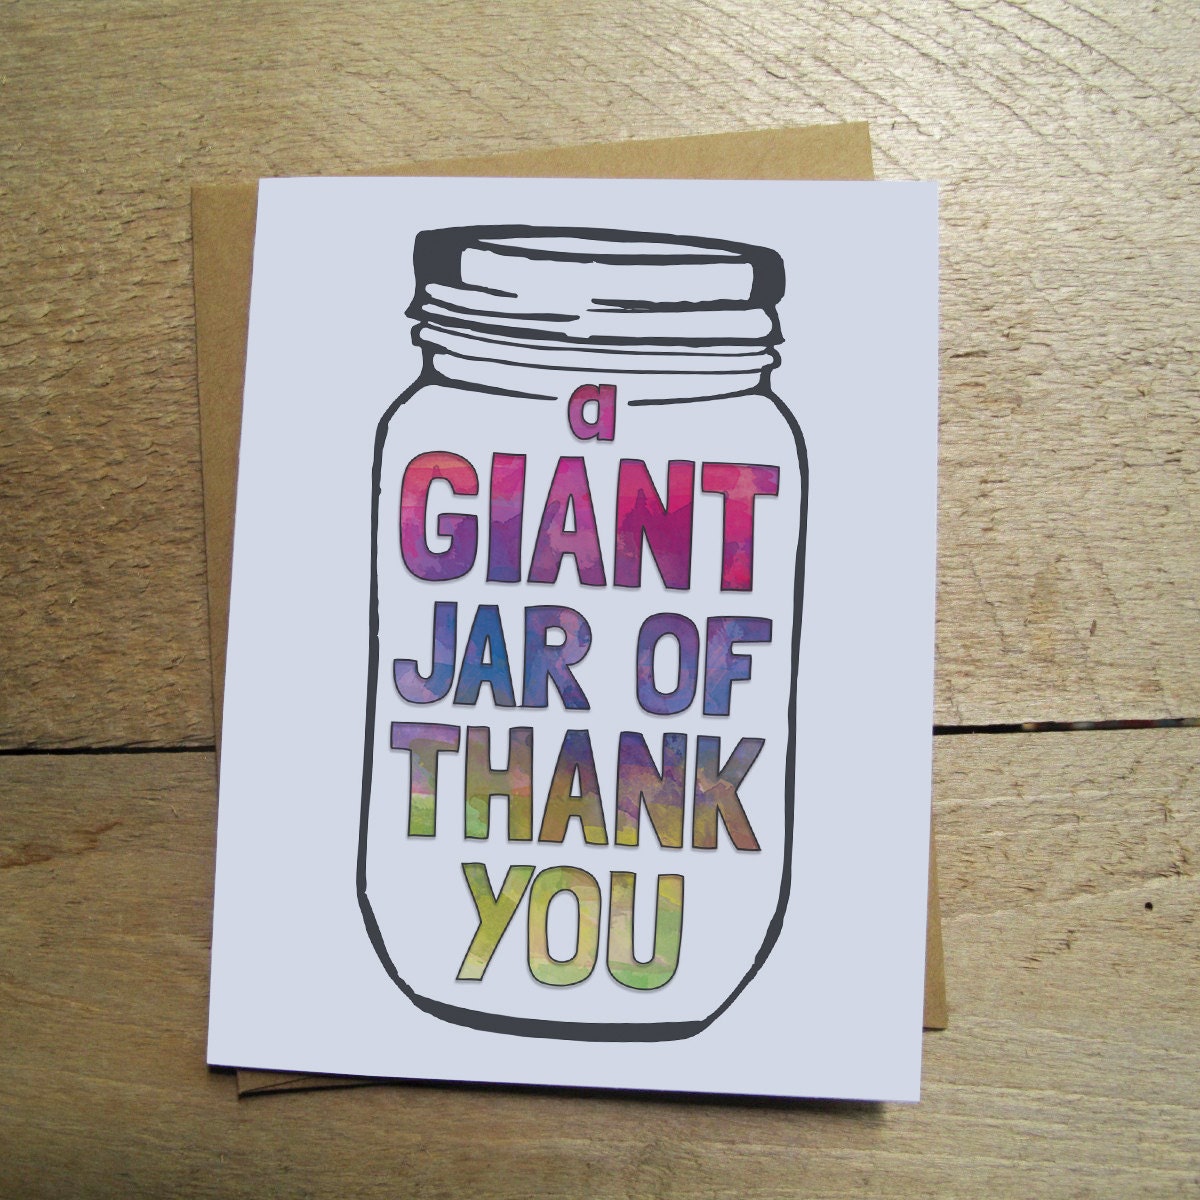 Giant Jar of Thank You Card by PaperWolfDsgn on Etsy